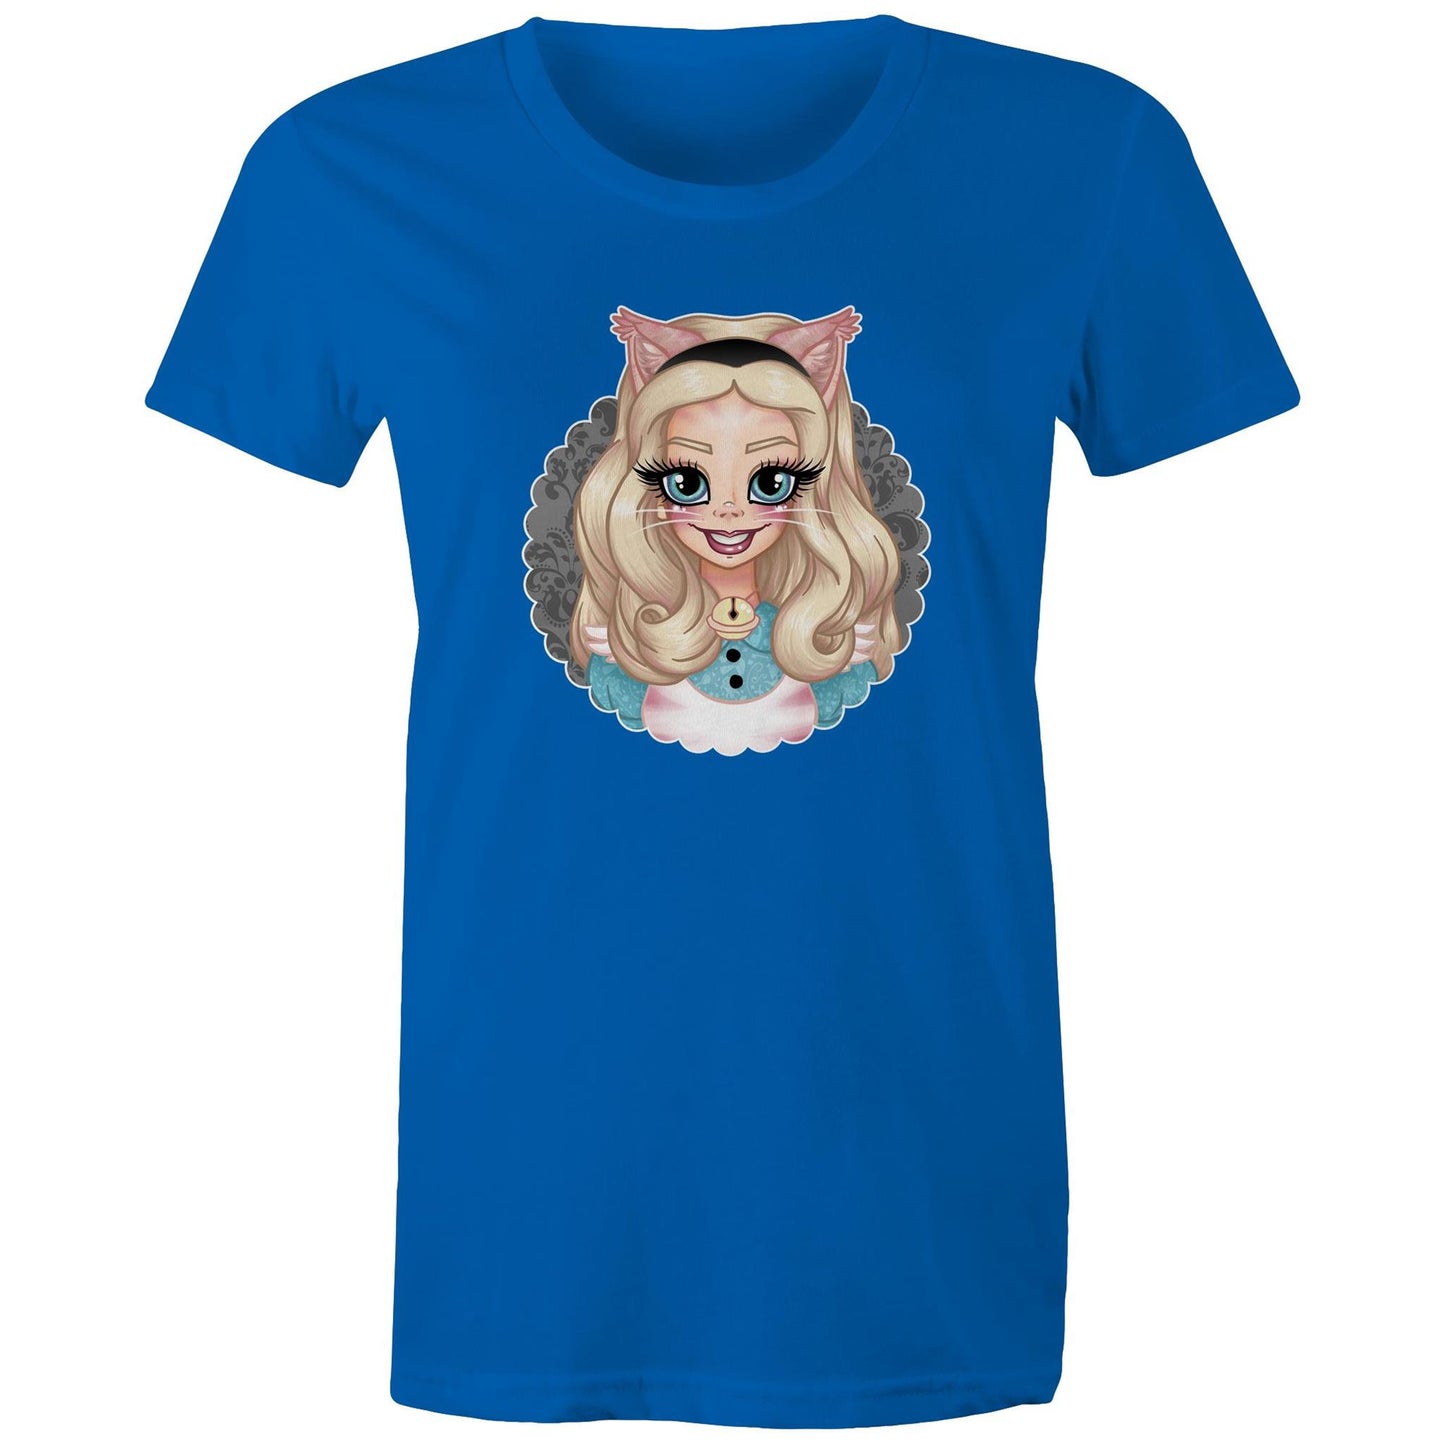 Alice in a Bubble - Ladies Tee - Exclusive - 10 Colors - Online Ordering Only